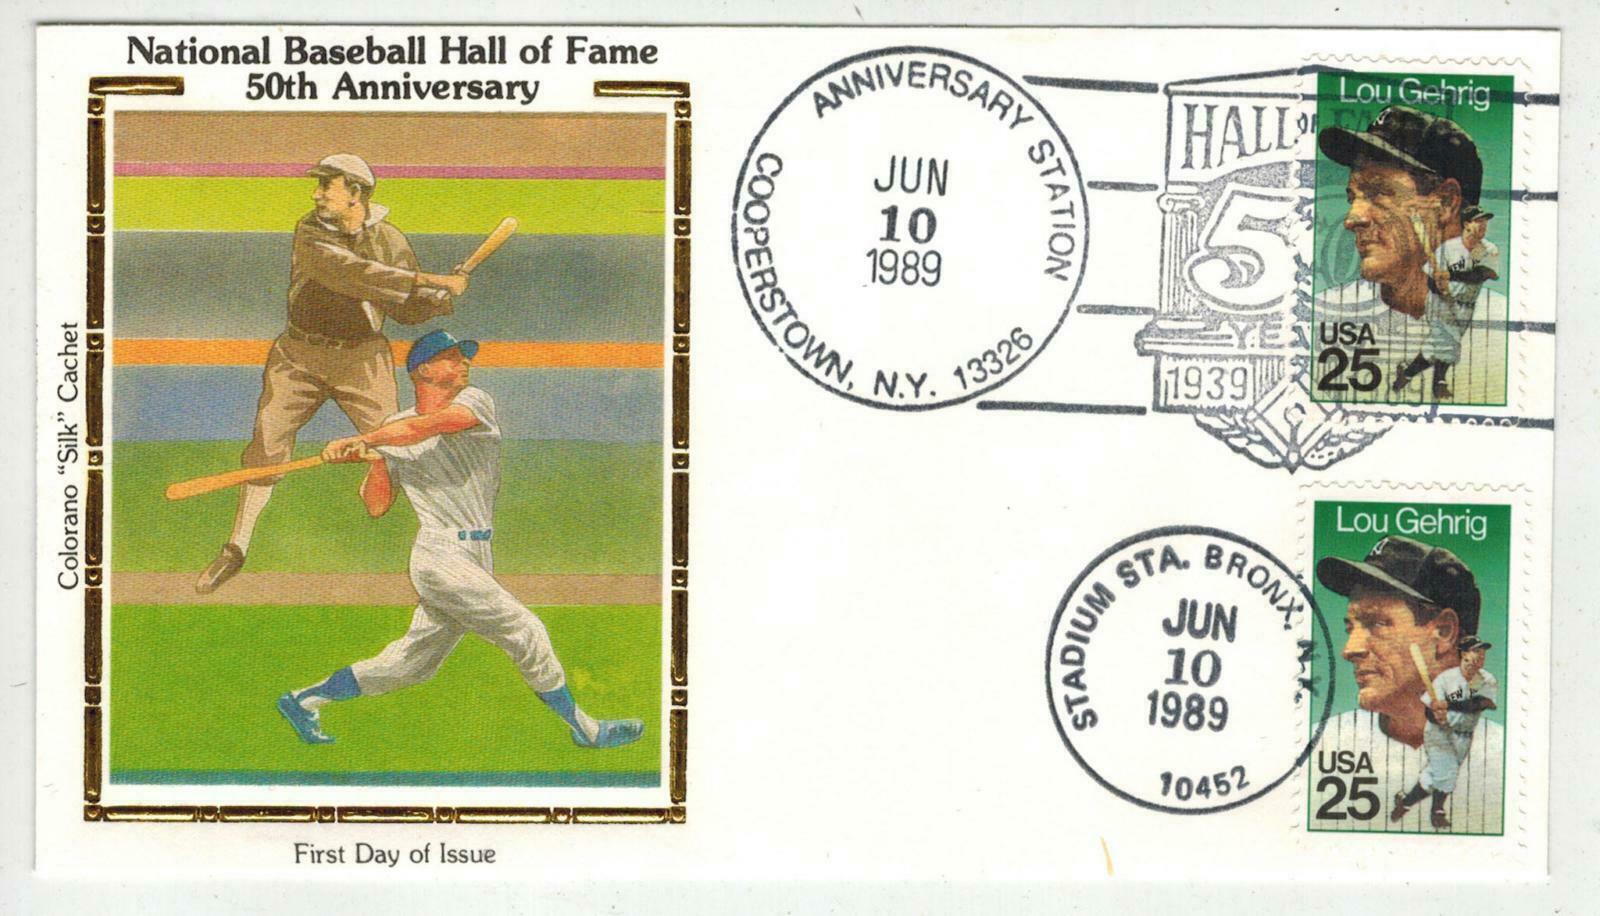 1989 BASEBALL HALL OF FAME + LOU GEHRIG DUAL FDC Colorano Bronx Stadium Station United States, Stamp / HipStamp